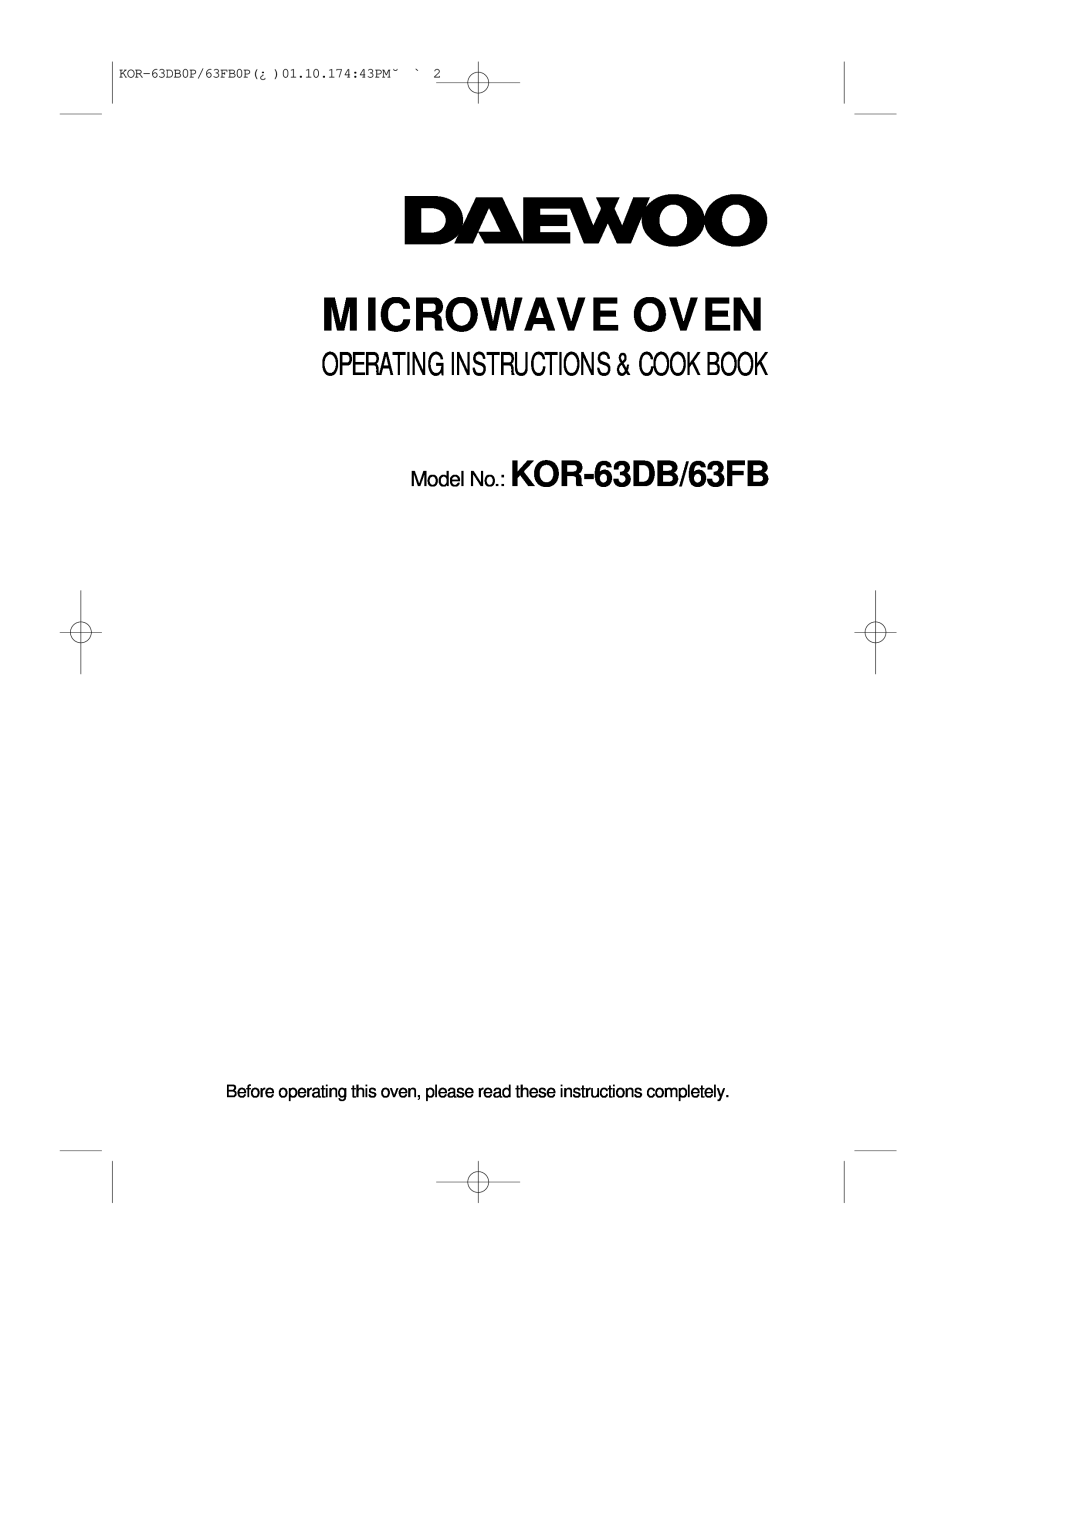 Daewoo manual Microwave Oven, Model No. KOR-63DB/63FB, Operating Instructions & Cook Book 